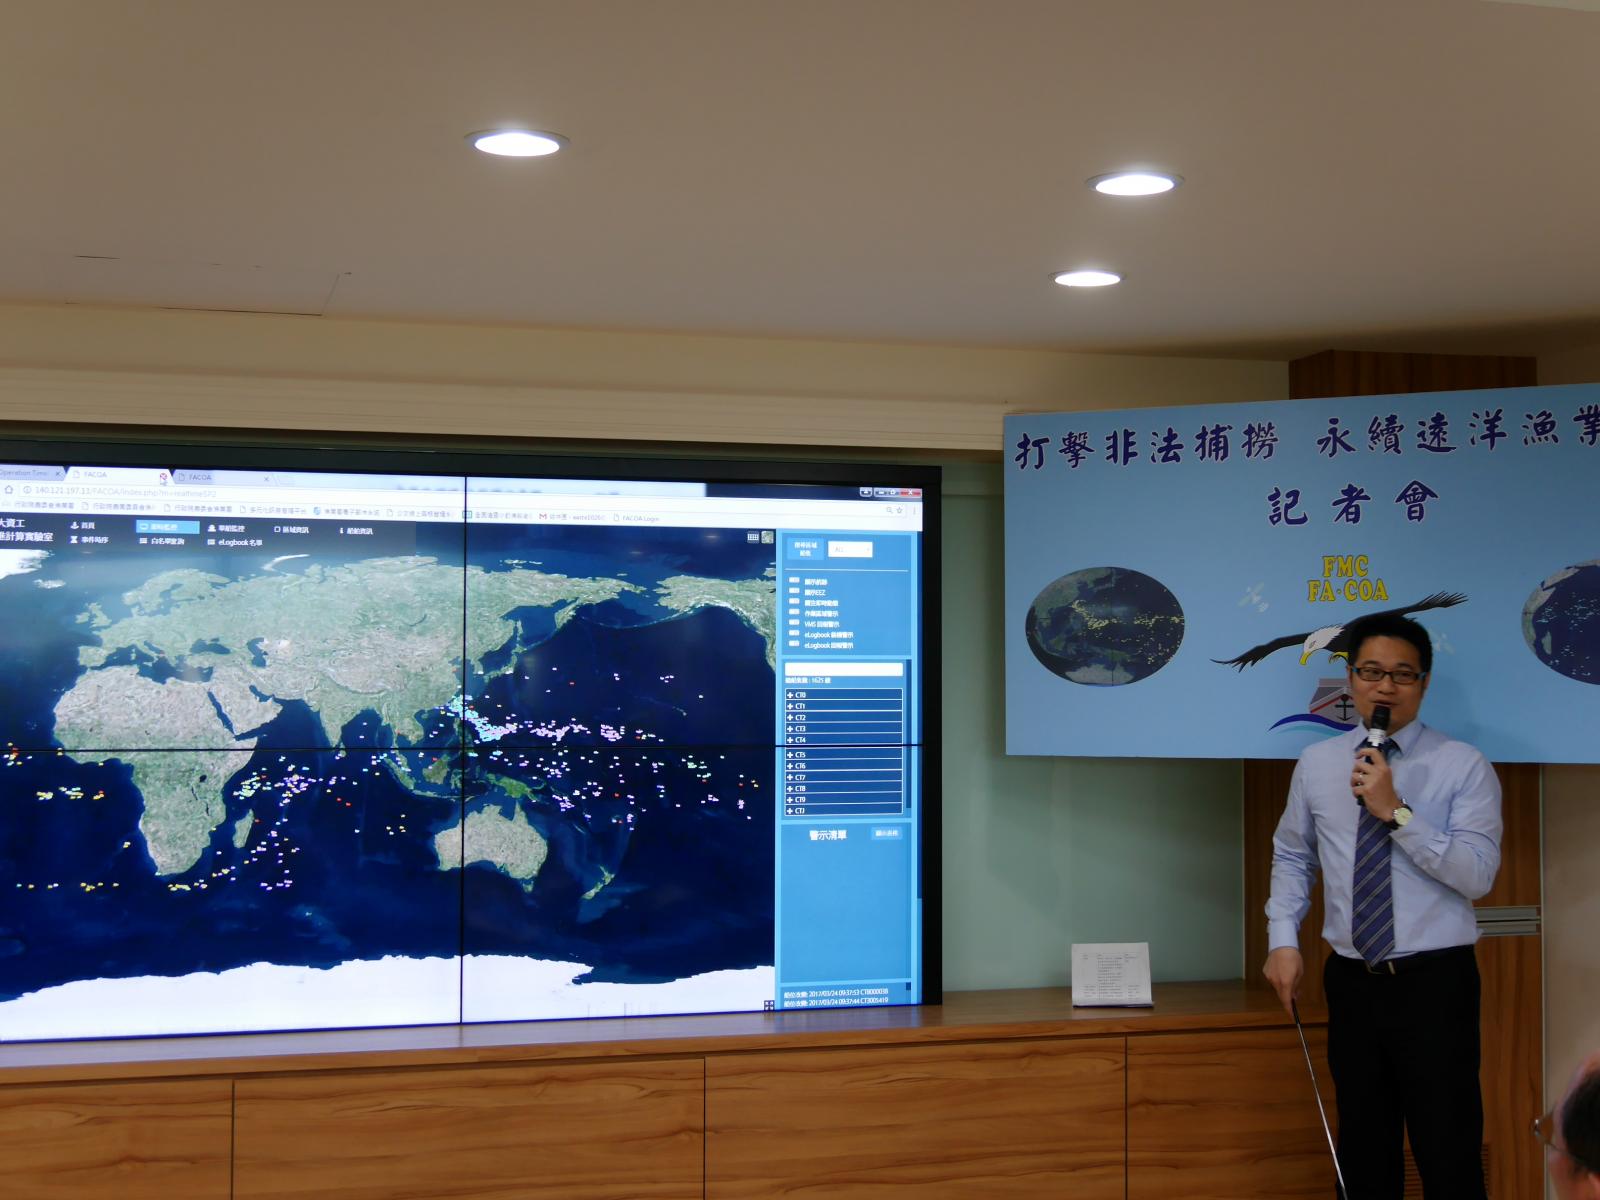 The conference not only demonstrated the progress of work that Taiwan has achieved in combating IUU fishing, but also showcased the operation of the 24-hour Fishery Monitoring Center recently established.  